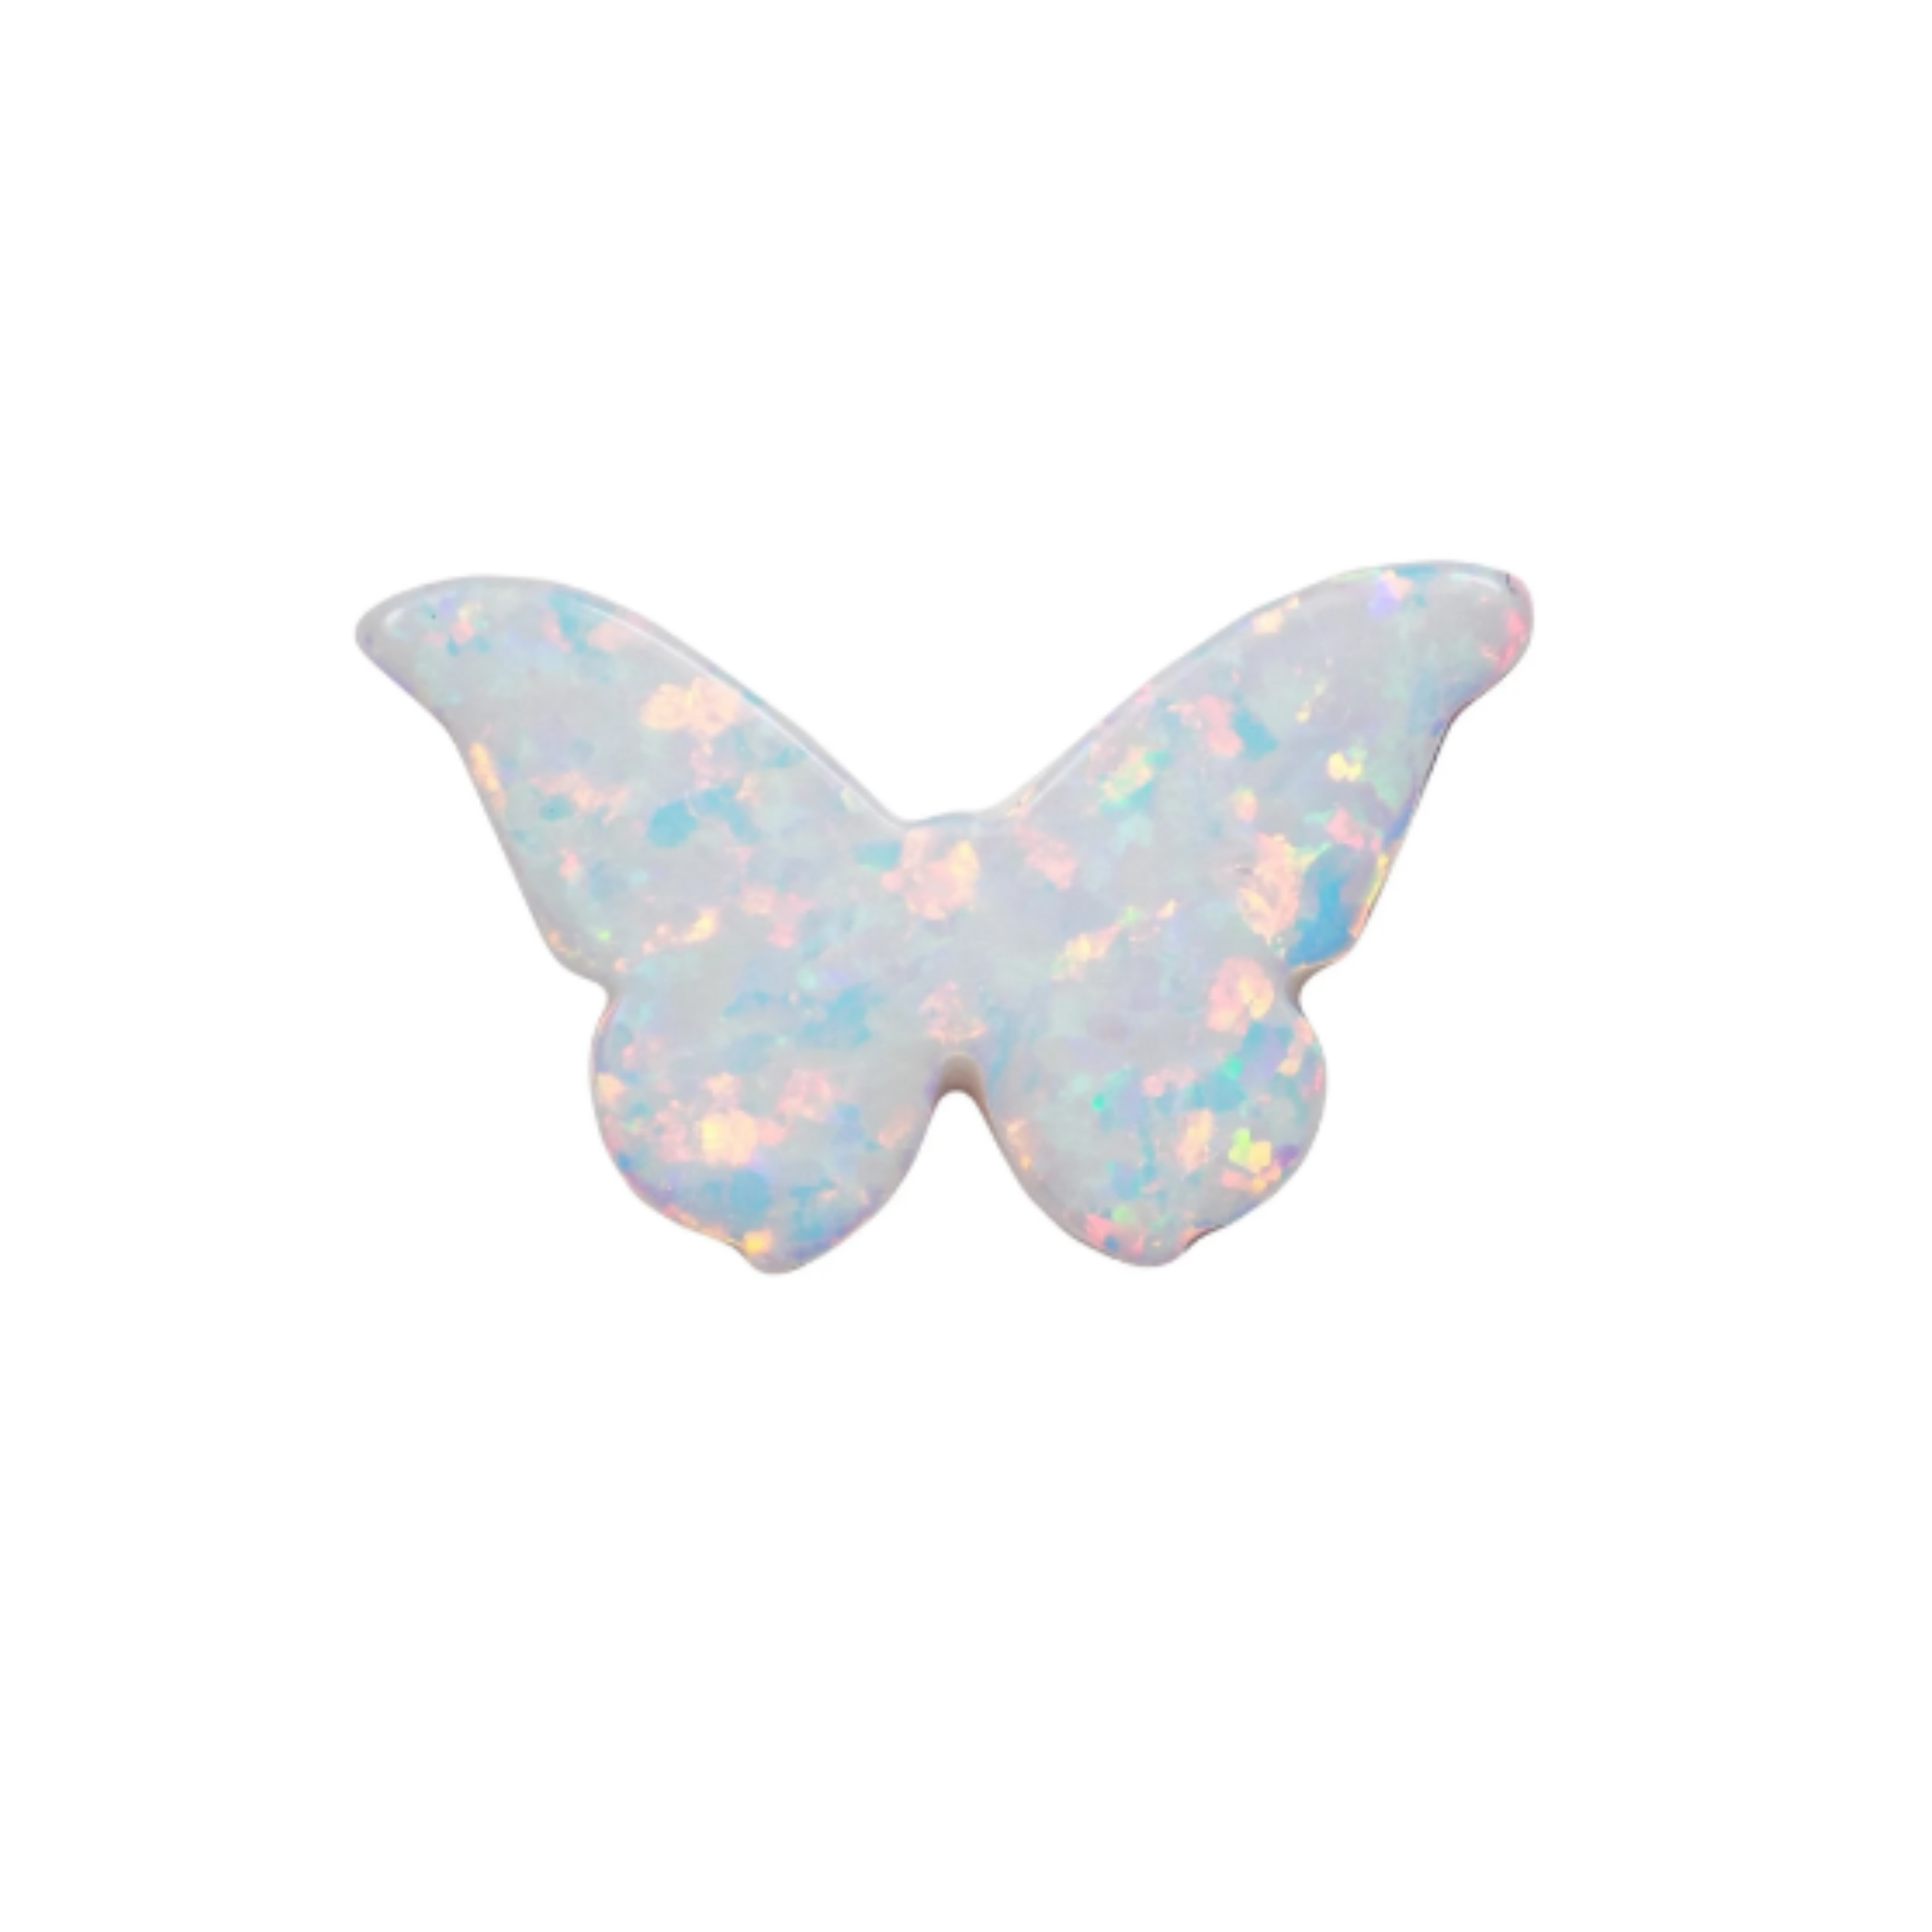 Opal Butterfly, Opal Butterfly 8.6mmx14.1mm Side Hole, Authentic Lab-created Opal Bead USA Seller